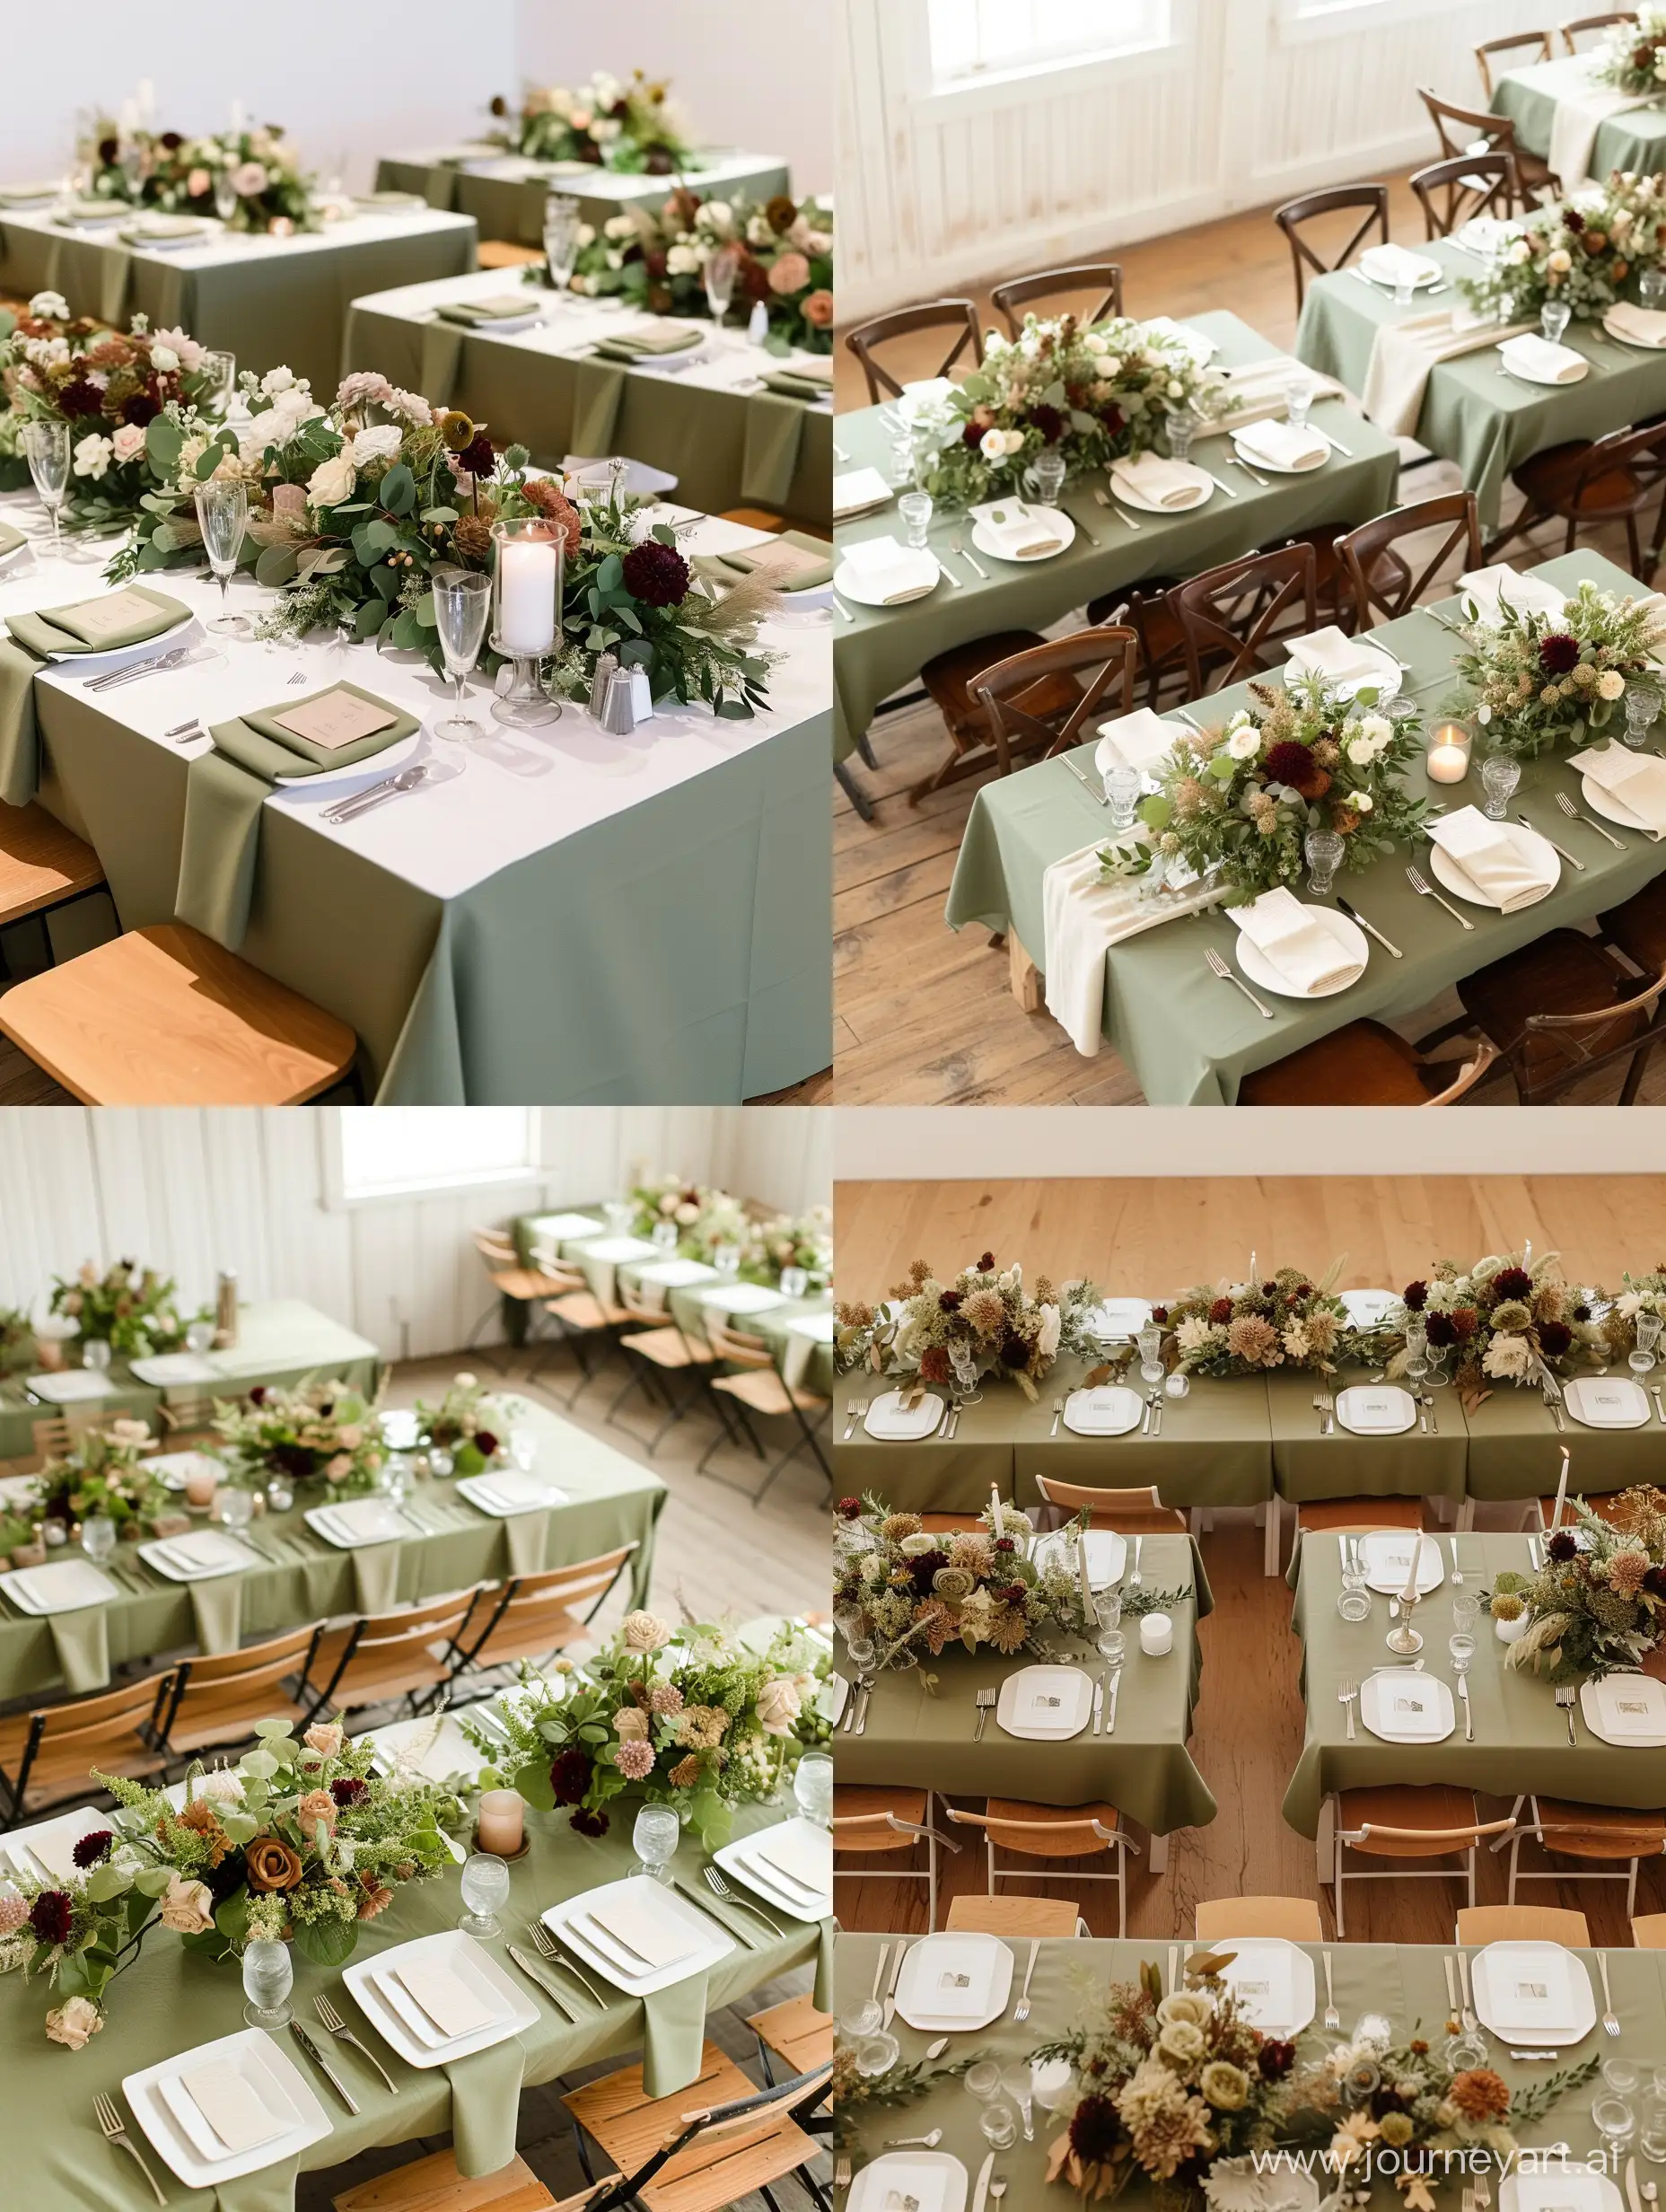 Wedding venue with white walls and wooden floors. Seven Square tables that sit eight people each. On the tables sage green table cloths, white plates and silver cutlery. In the middle of the tables flower arrangements of green, beige and burgundy and a light thick candle.